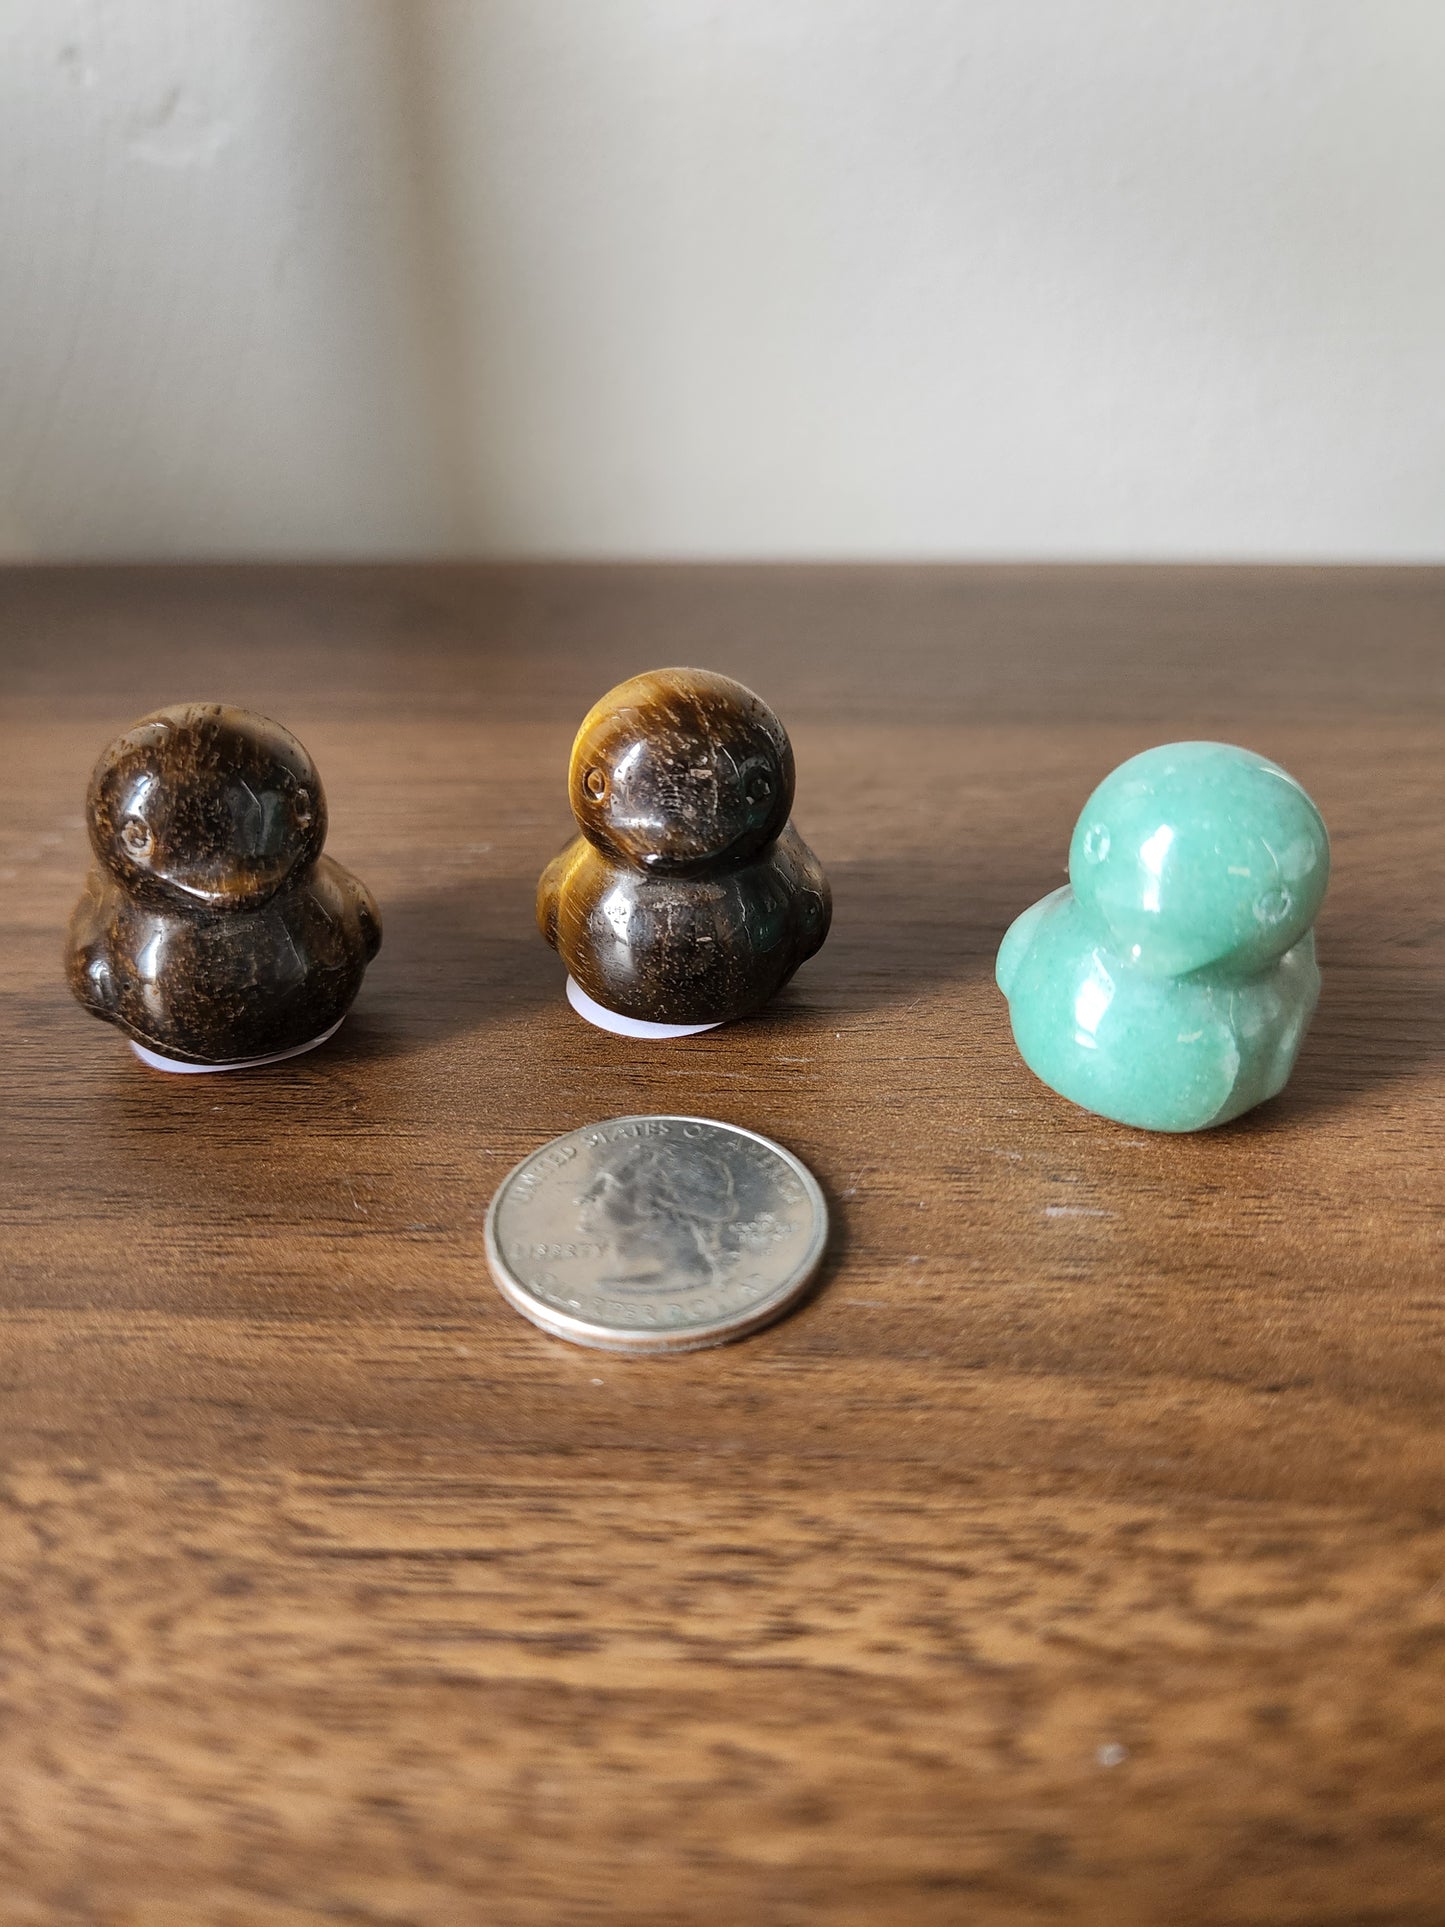 Small Rubber Duck Carving